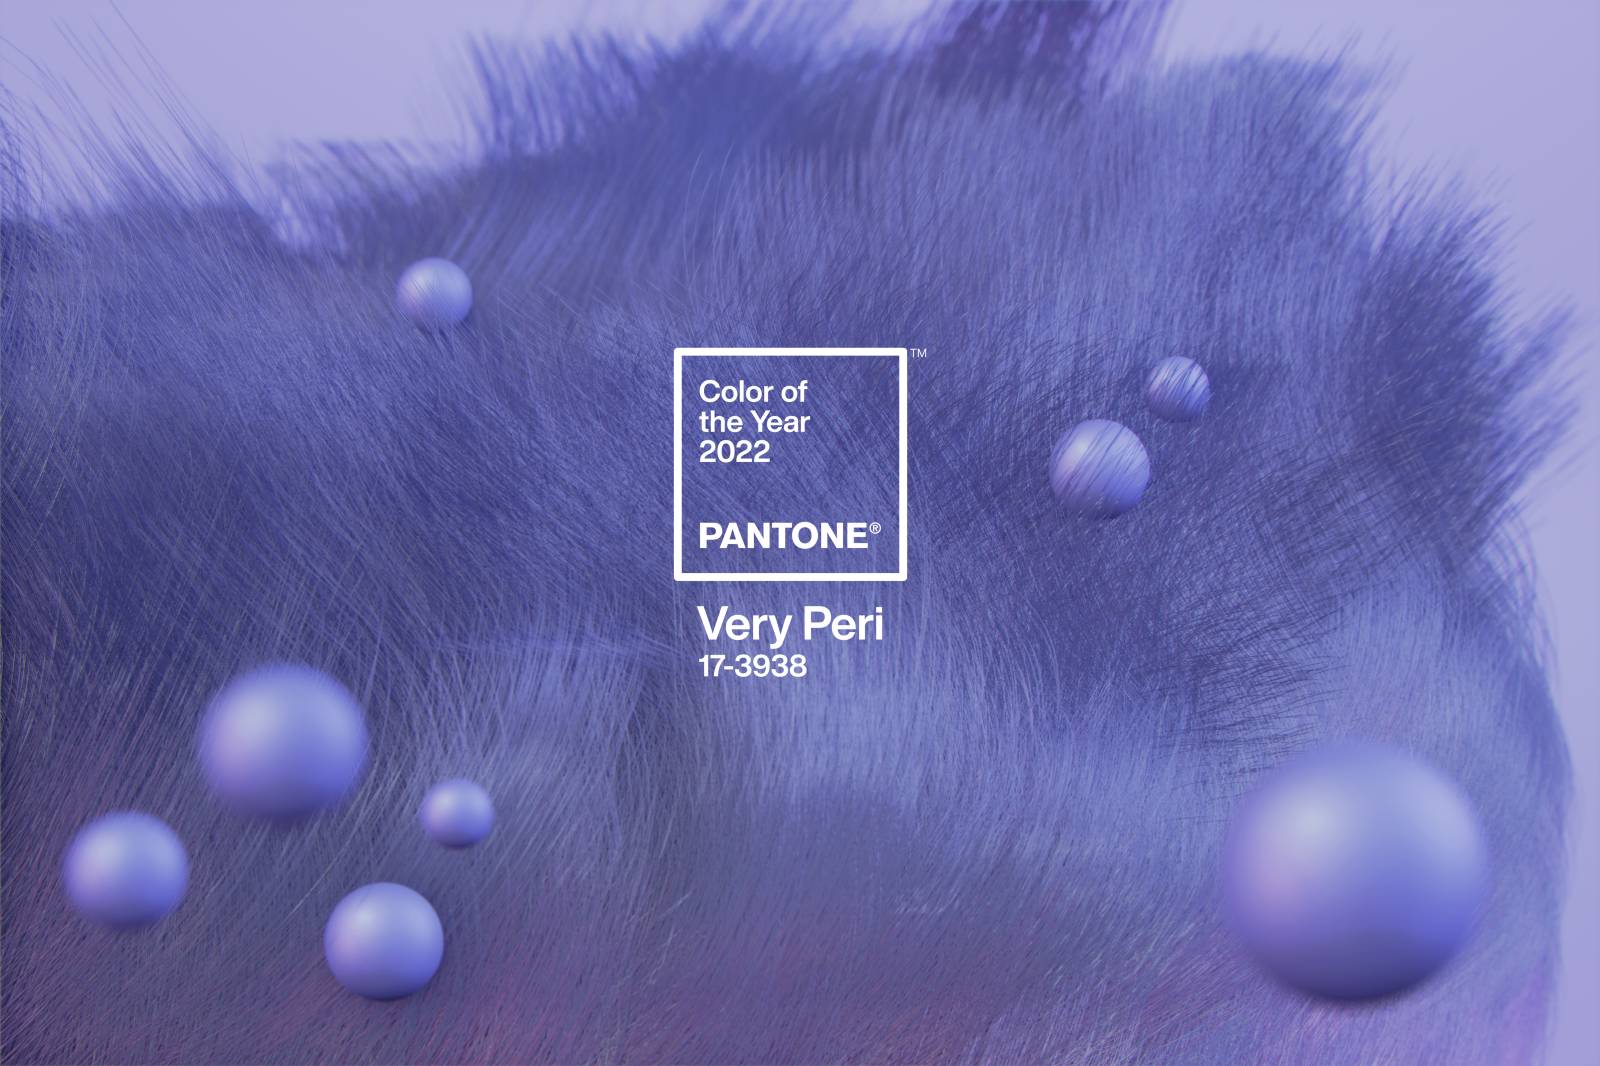 For Its 2022 Color of the Year, Pantone Has Invented a New Shade: a &#39;Happy&#39; Periwinkle Blue